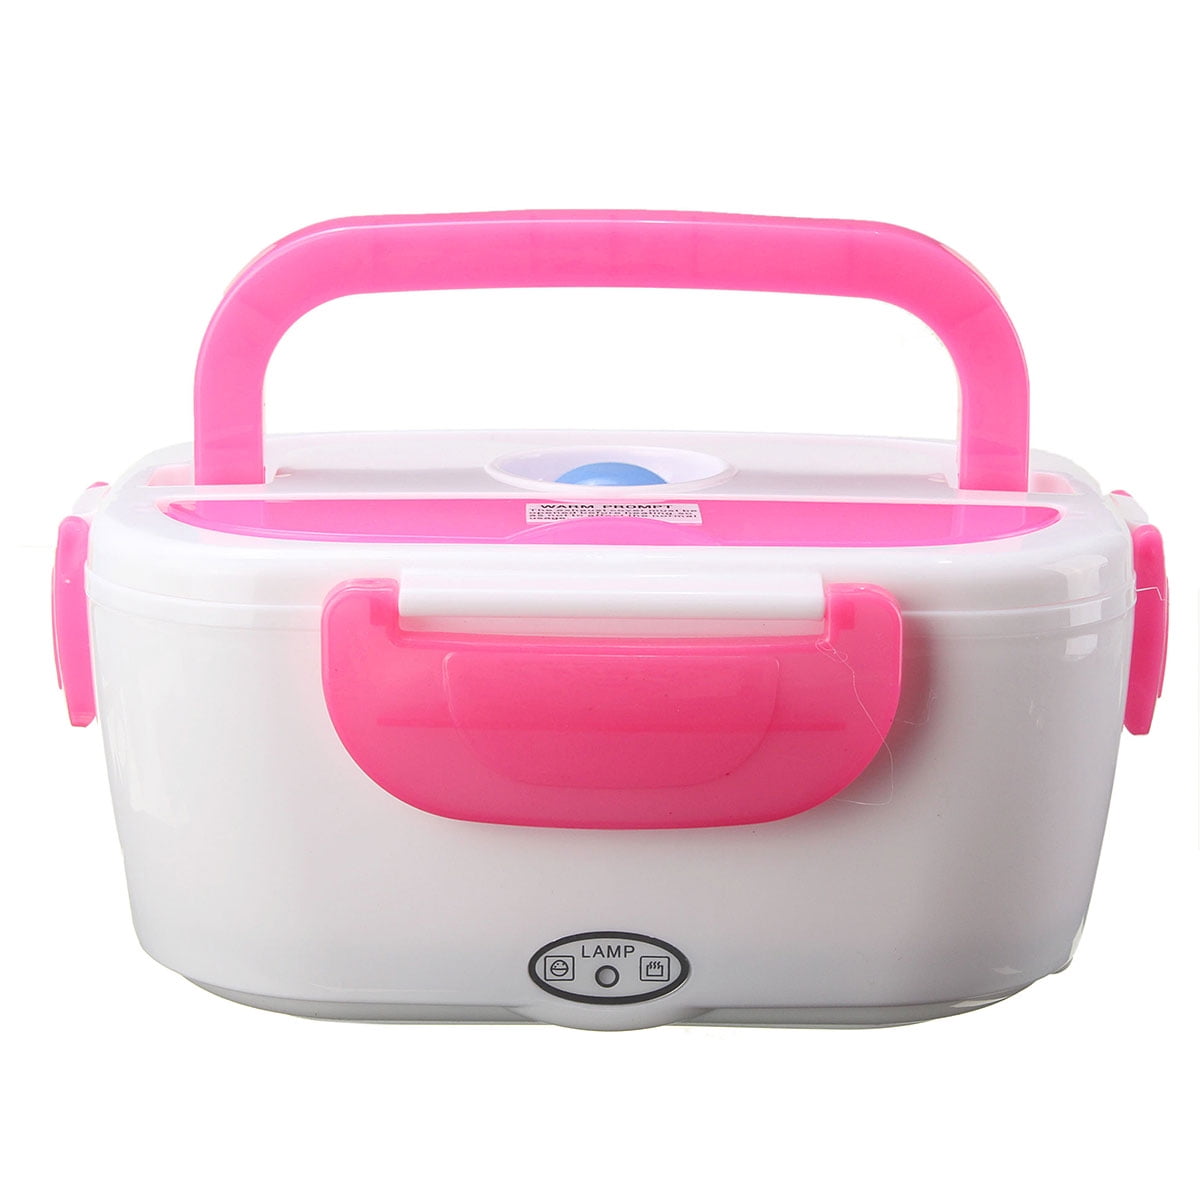 Bear DFH-B10T6 Self Heated Lunch Box, Leakproof Plug-in Lunch Box, with  Keep Warm Function, 120V, Pink